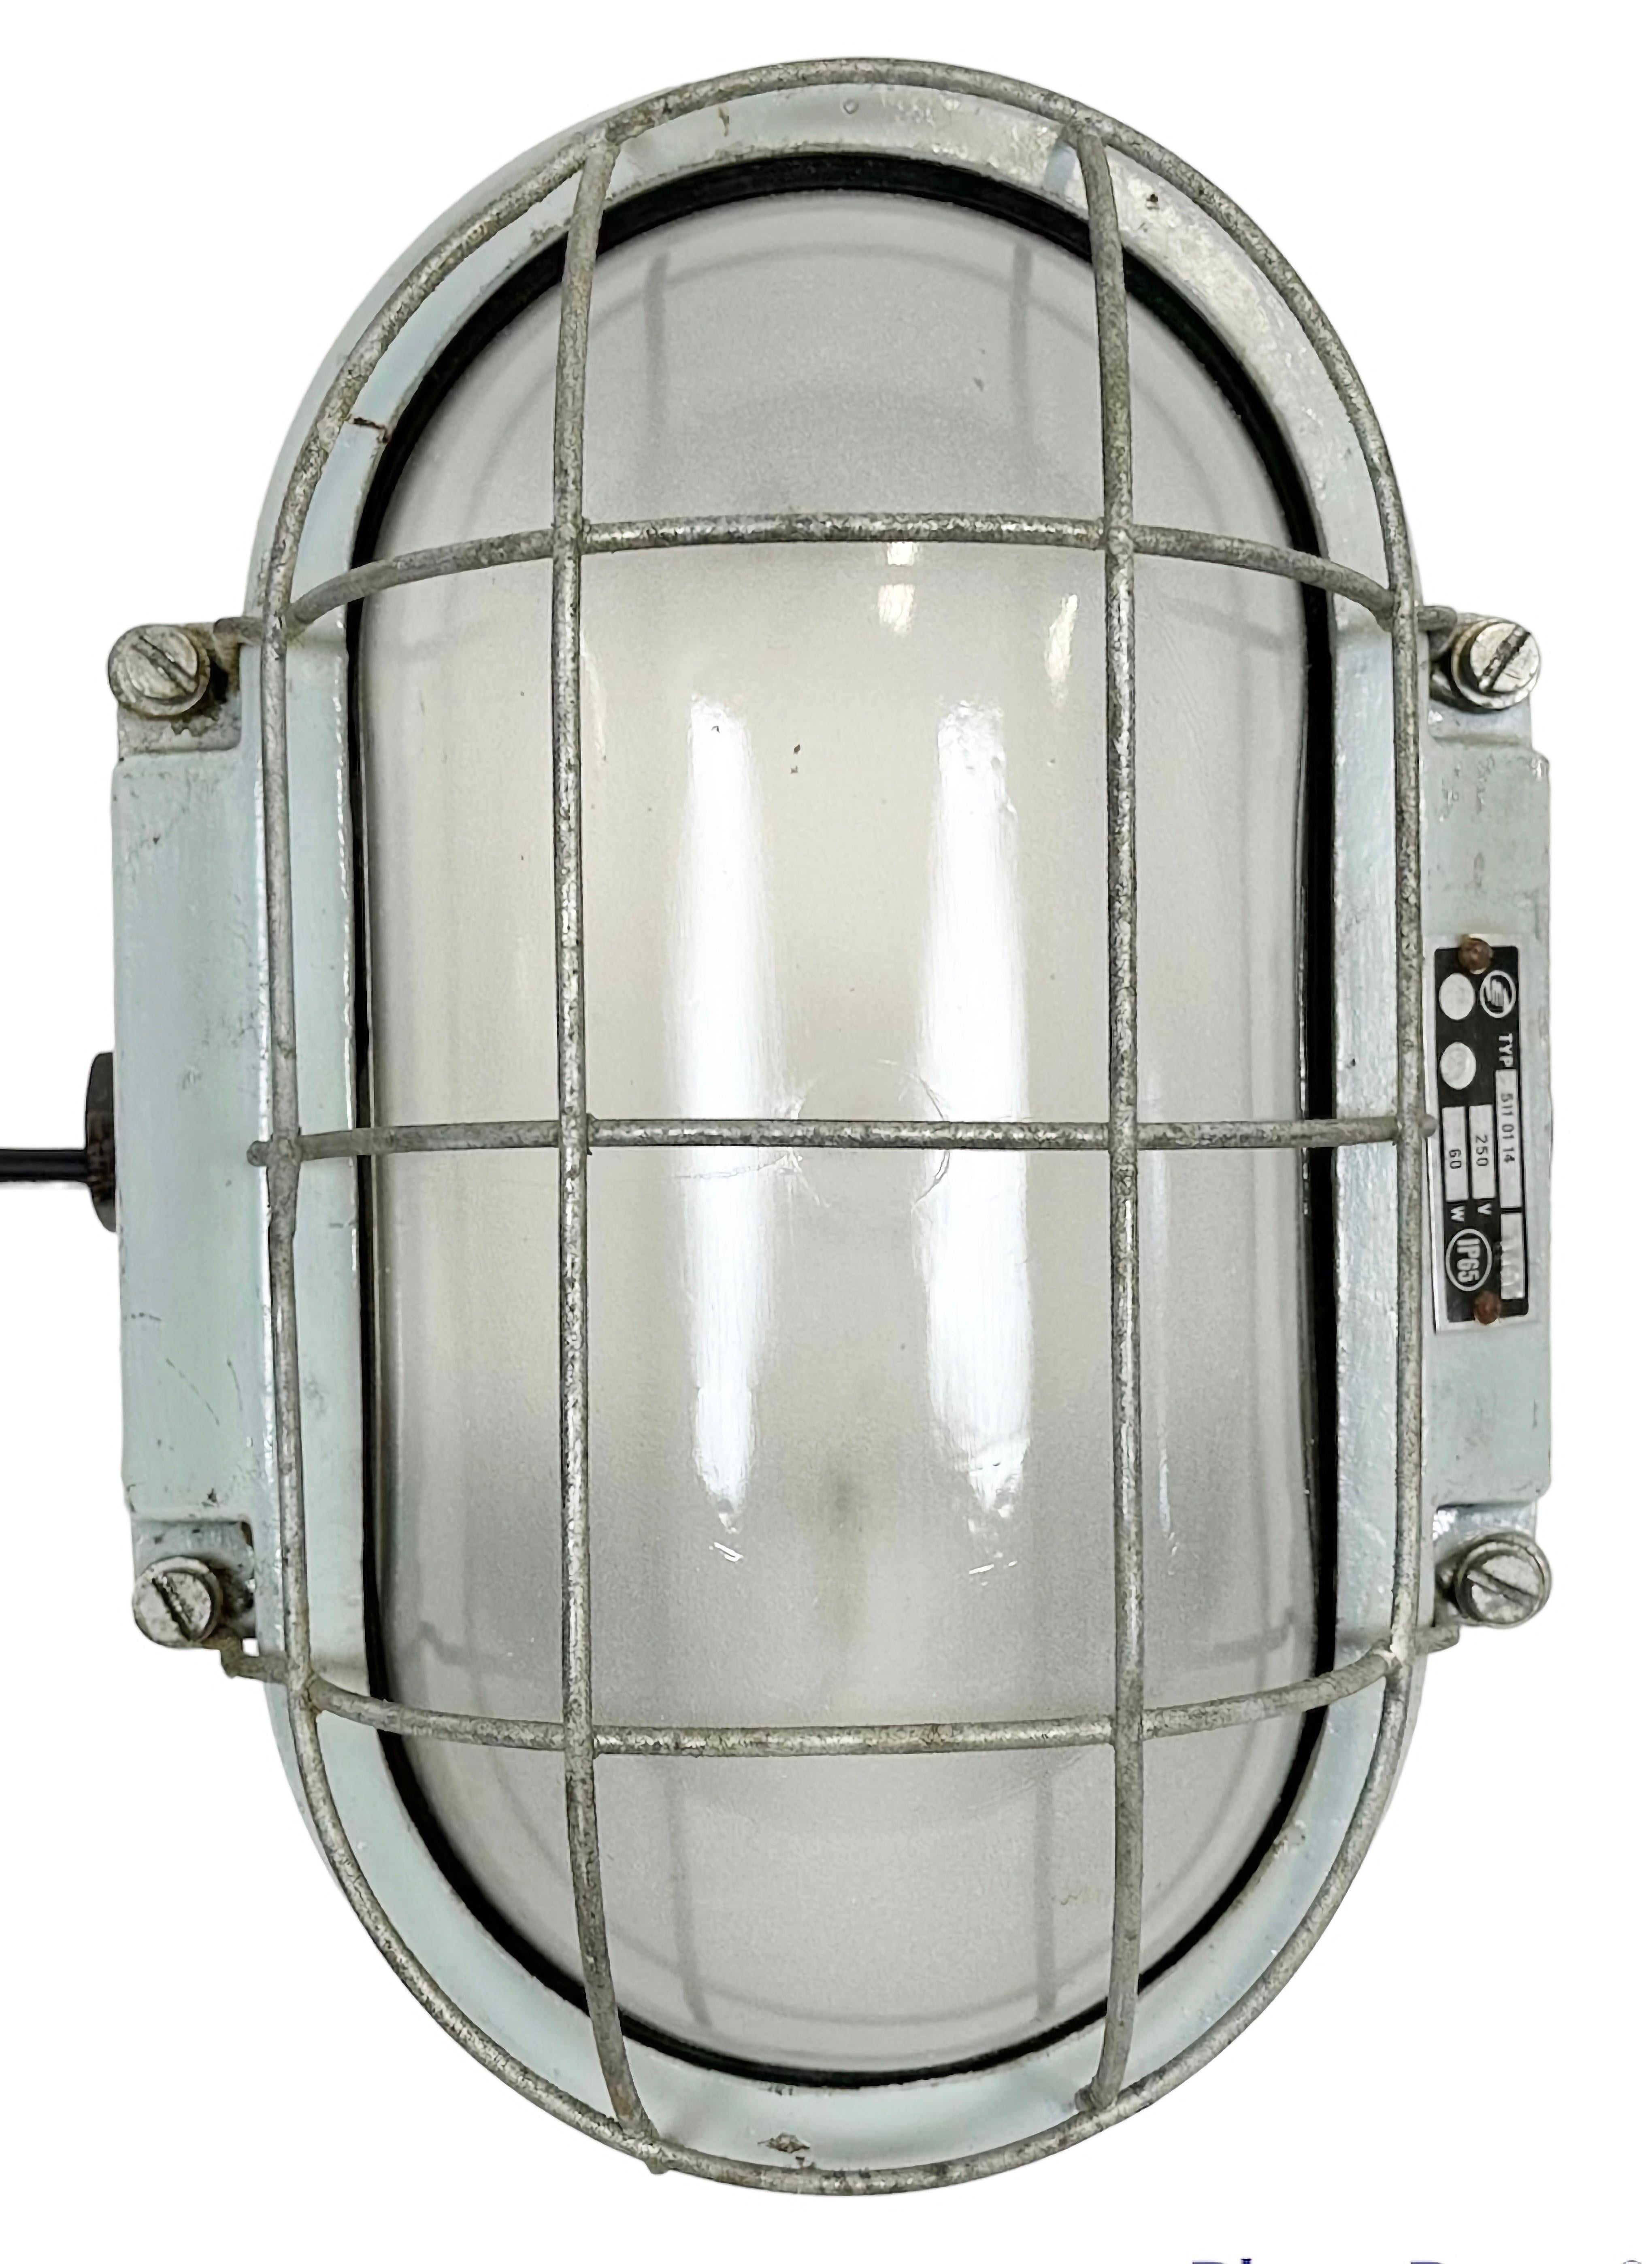 This Industrial wall light was made by Elektrosvit in former Czechoslovakia during the 1970s. It features a cast aluminium body, a milk glass and a steel grid. New porcelain socket requires E 27/ E26 light bulbs. New wire. The weight of the lamp is